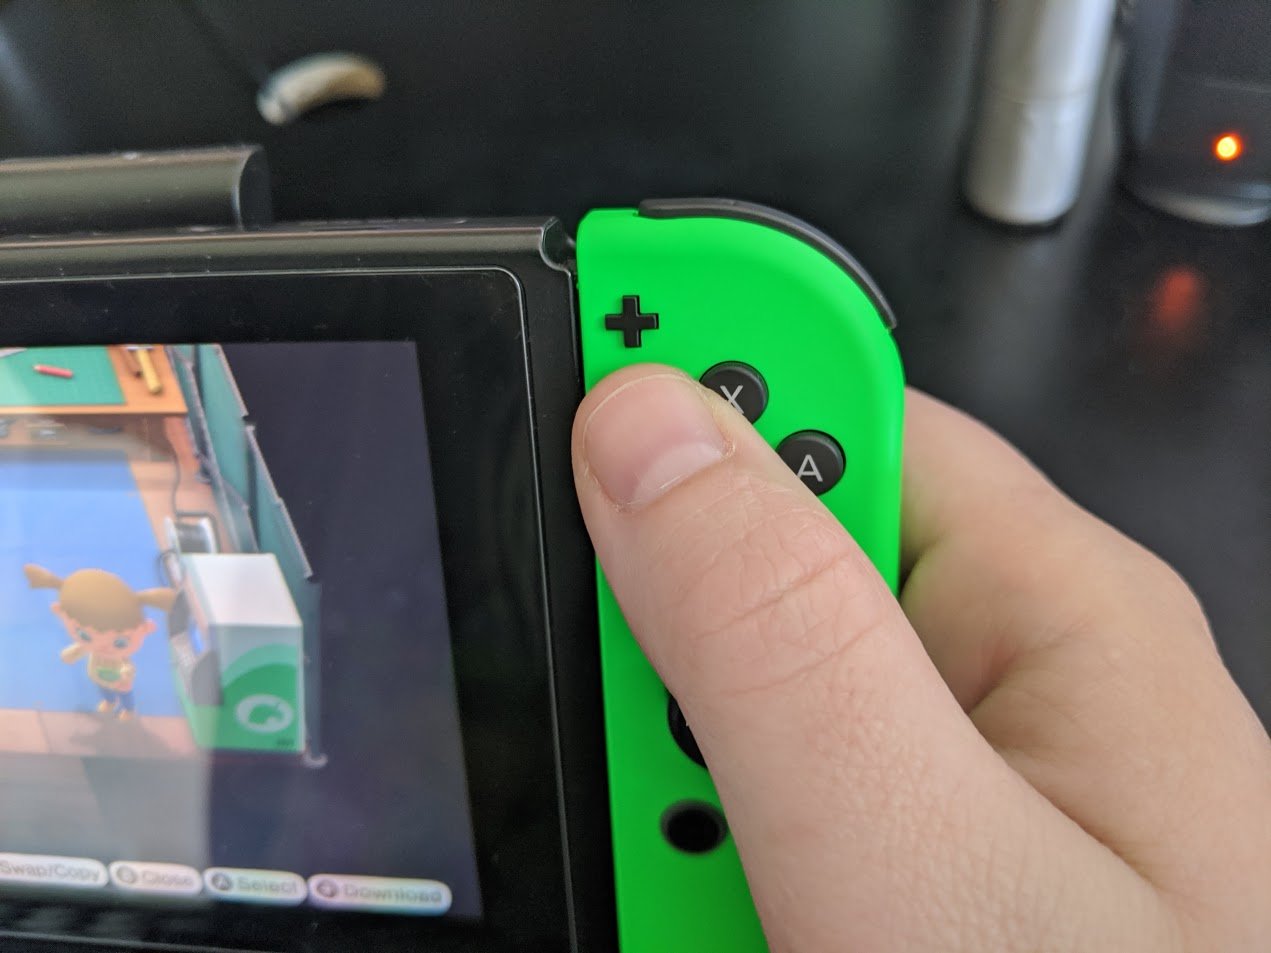 How to scan QR codes in ACNH: Press the + button on the right side of your Joy-Cons or controller